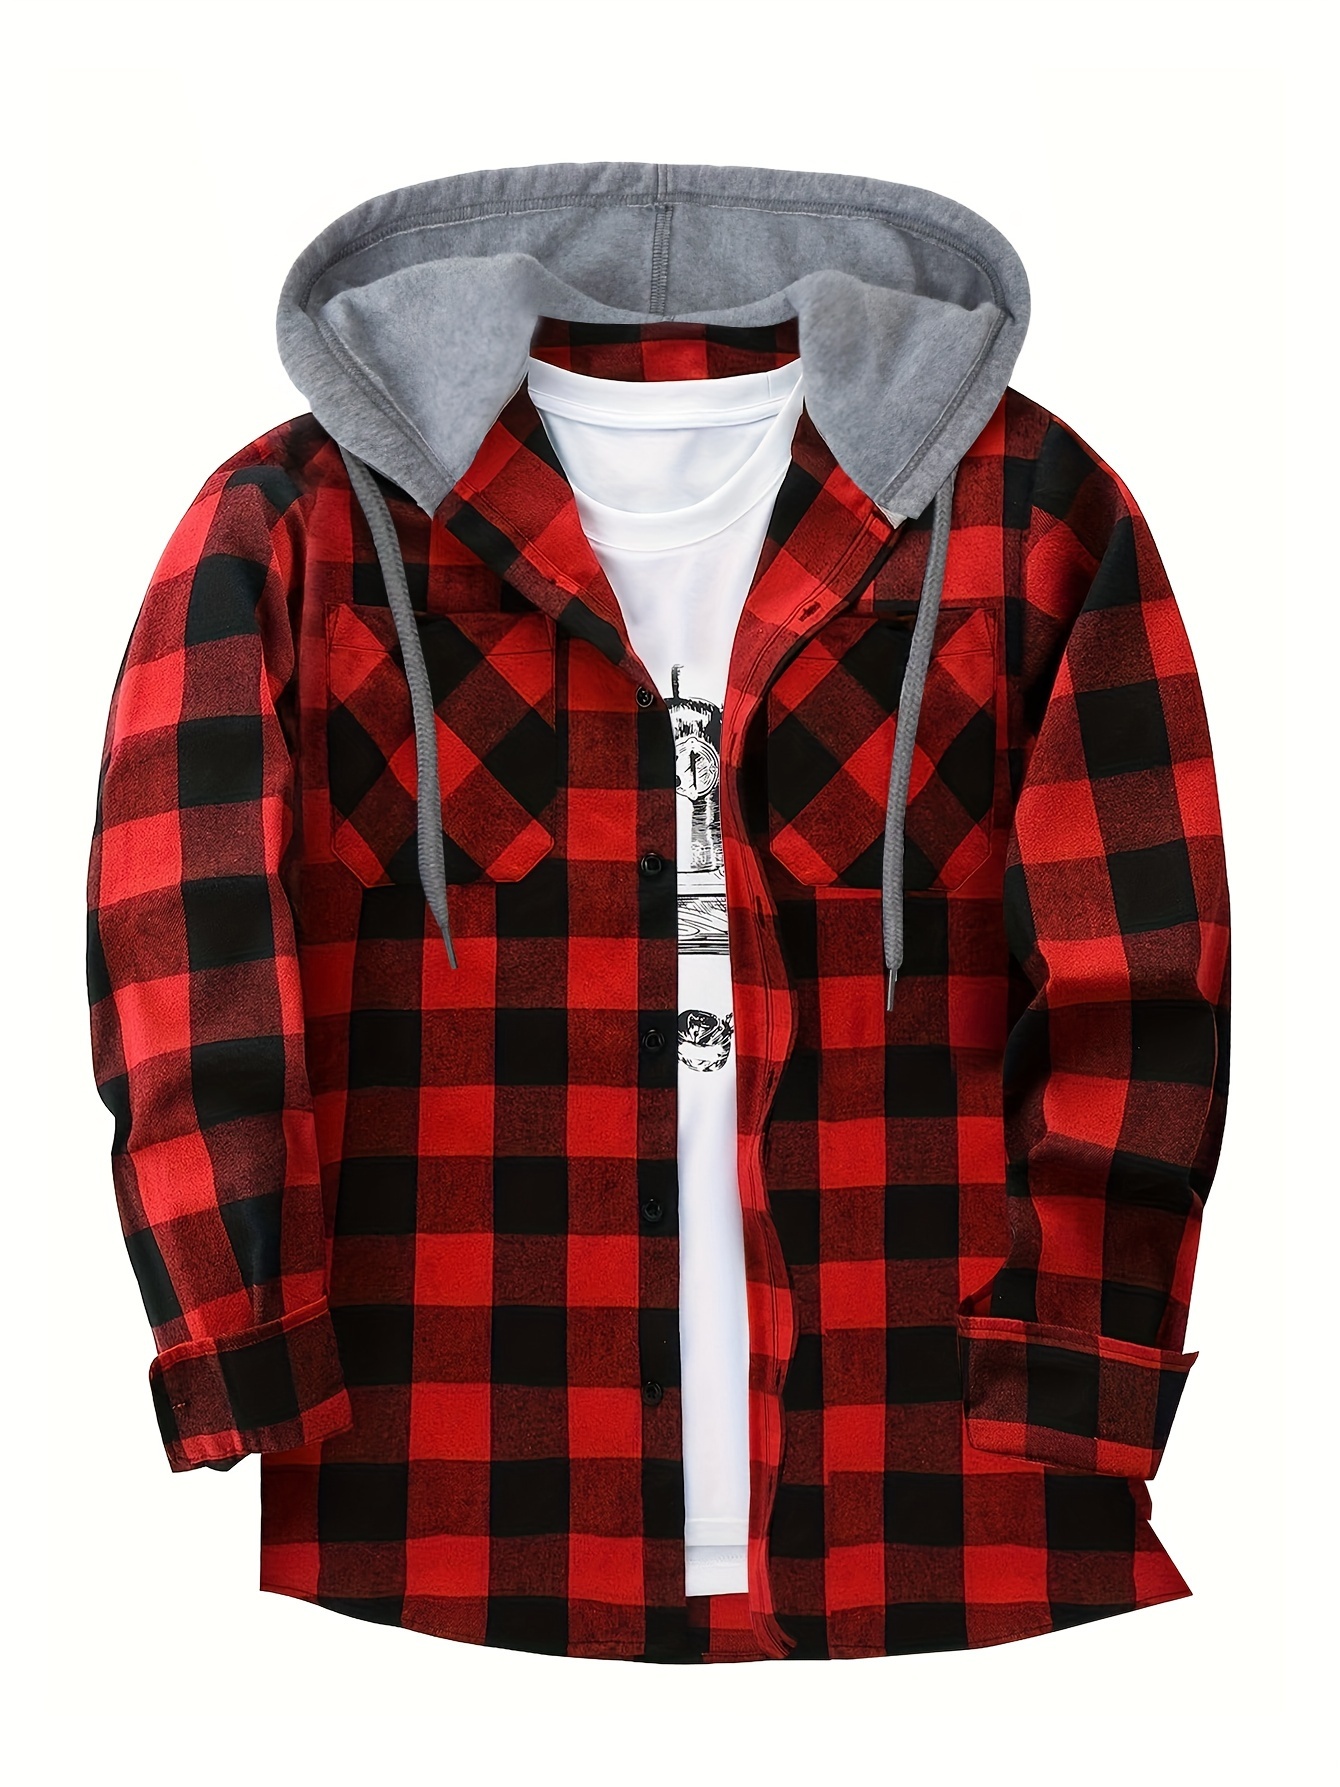 long sleeve casual regular fit button up hooded shirts jacket plaid shirt coat for men details 35